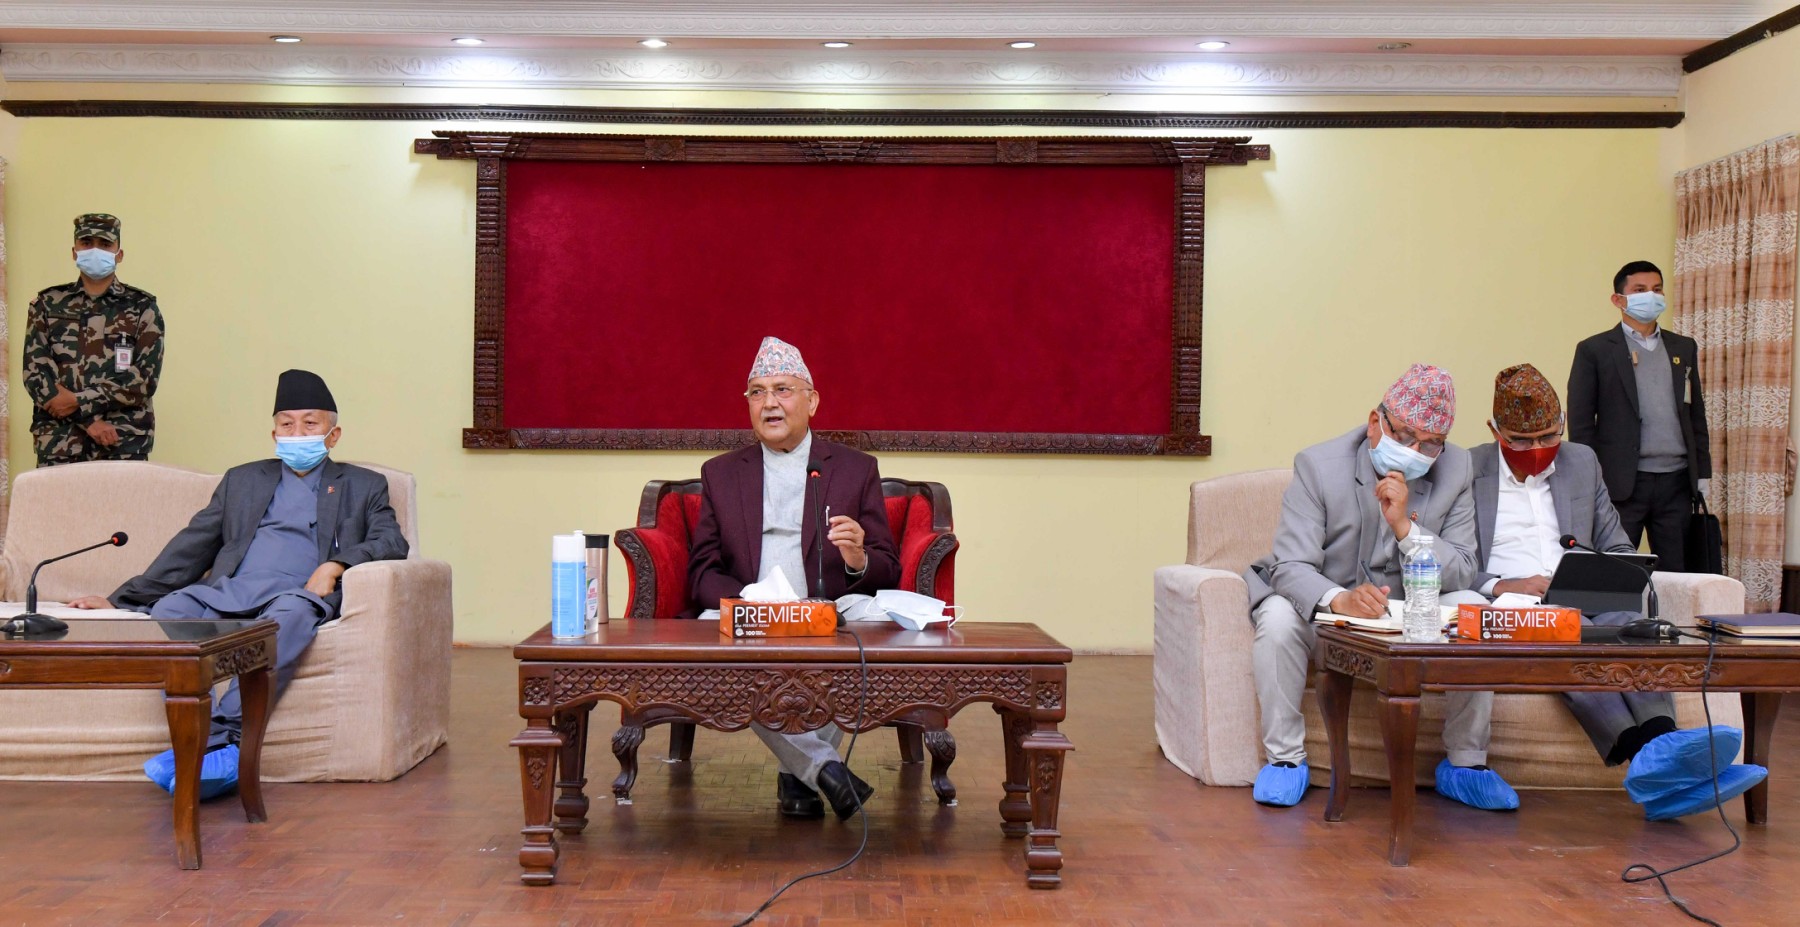 UML central committee meeting was postponed for one day